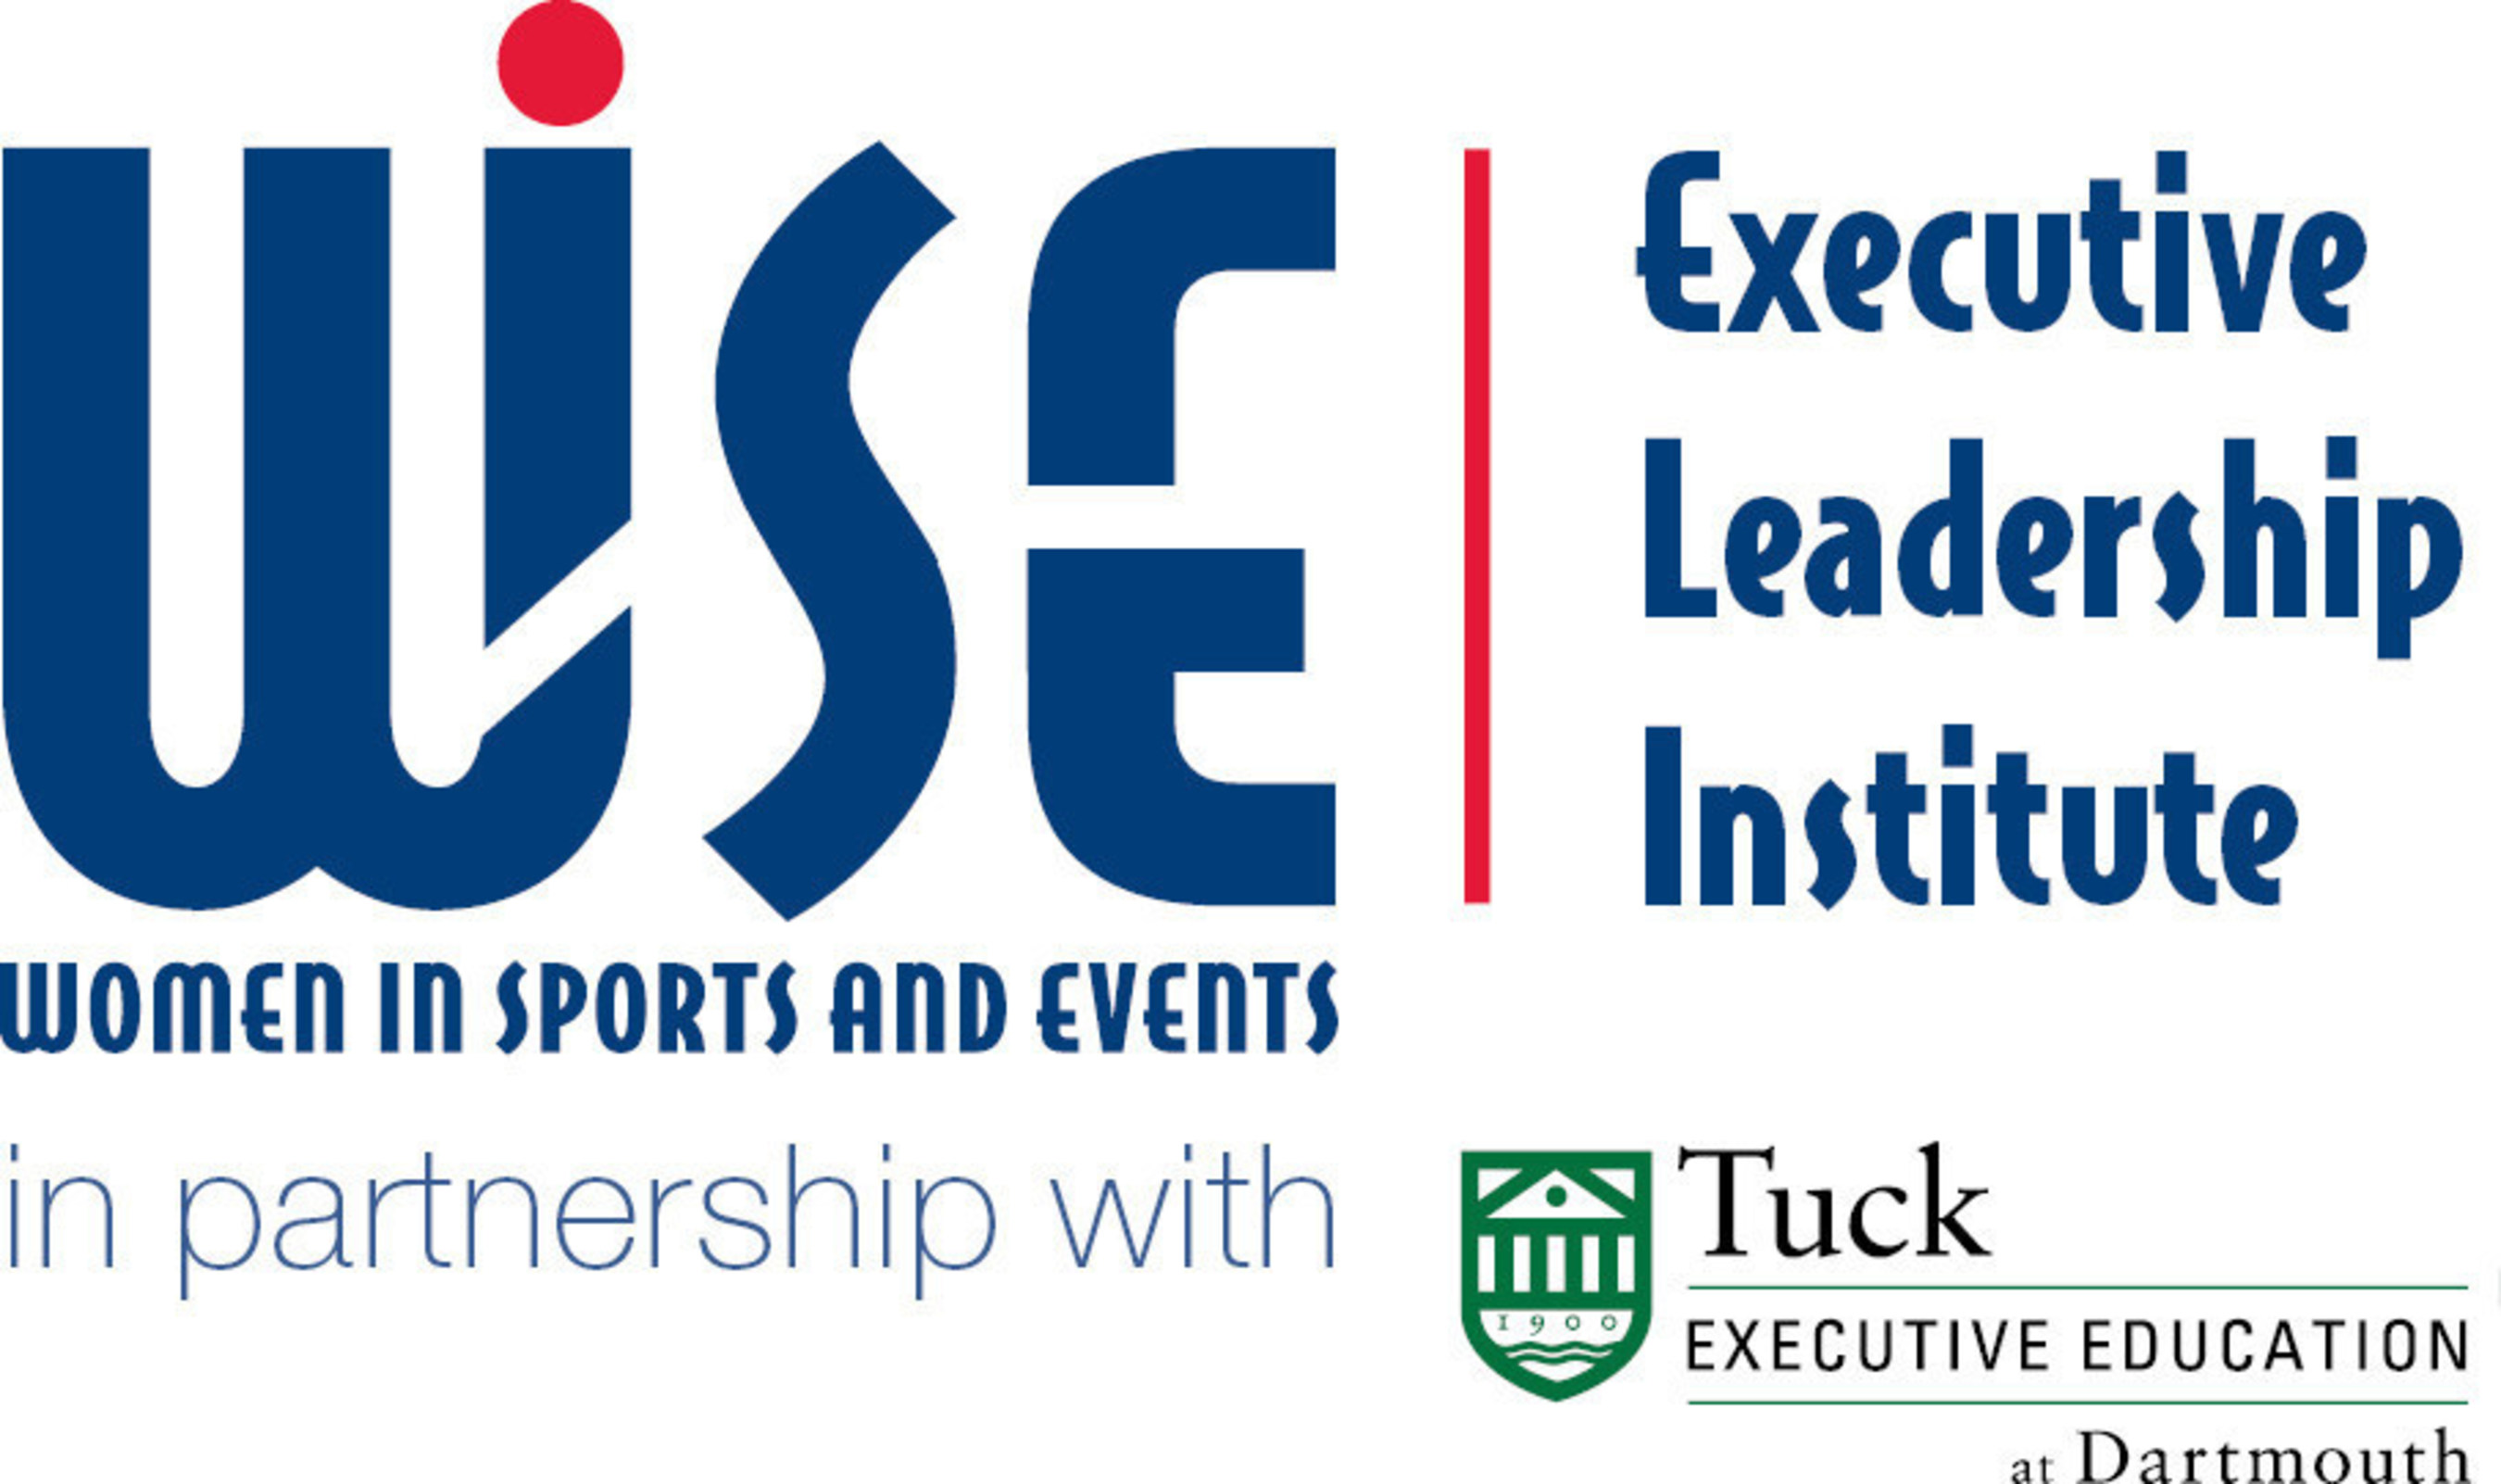 The inaugural WISE Executive Leadership Institute in partnership with Tuck Executive Education at Dartmouth took place November 9-14, 2014.